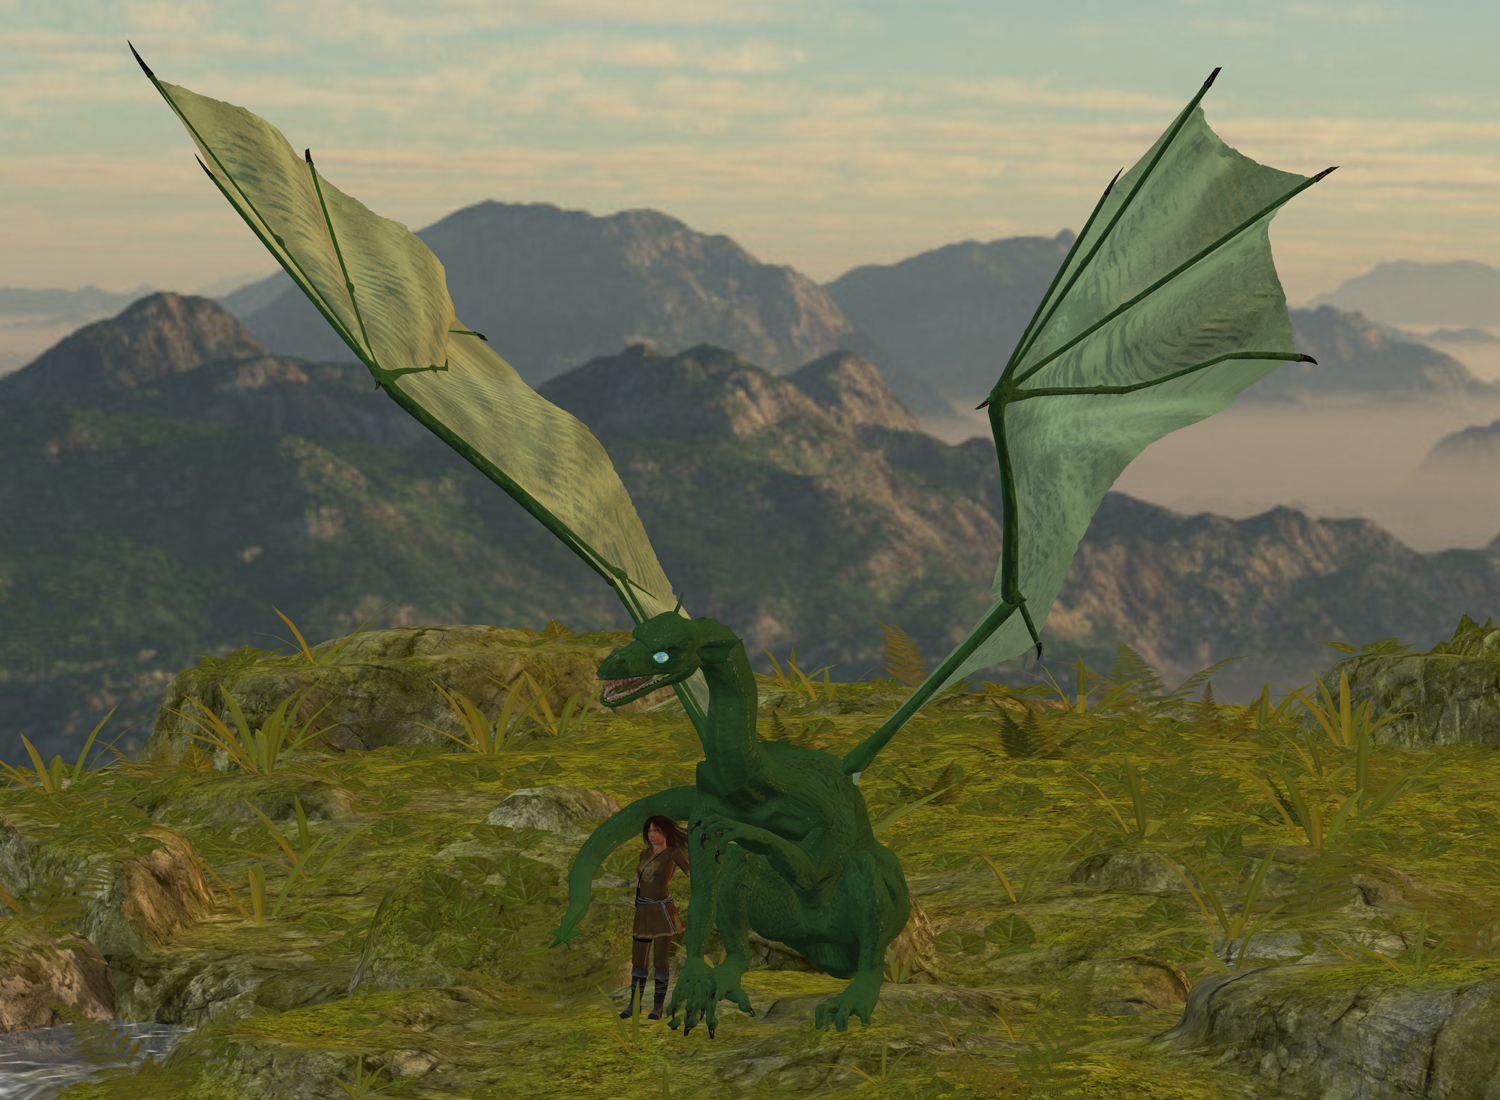 A picture of a green dragon and her rider.